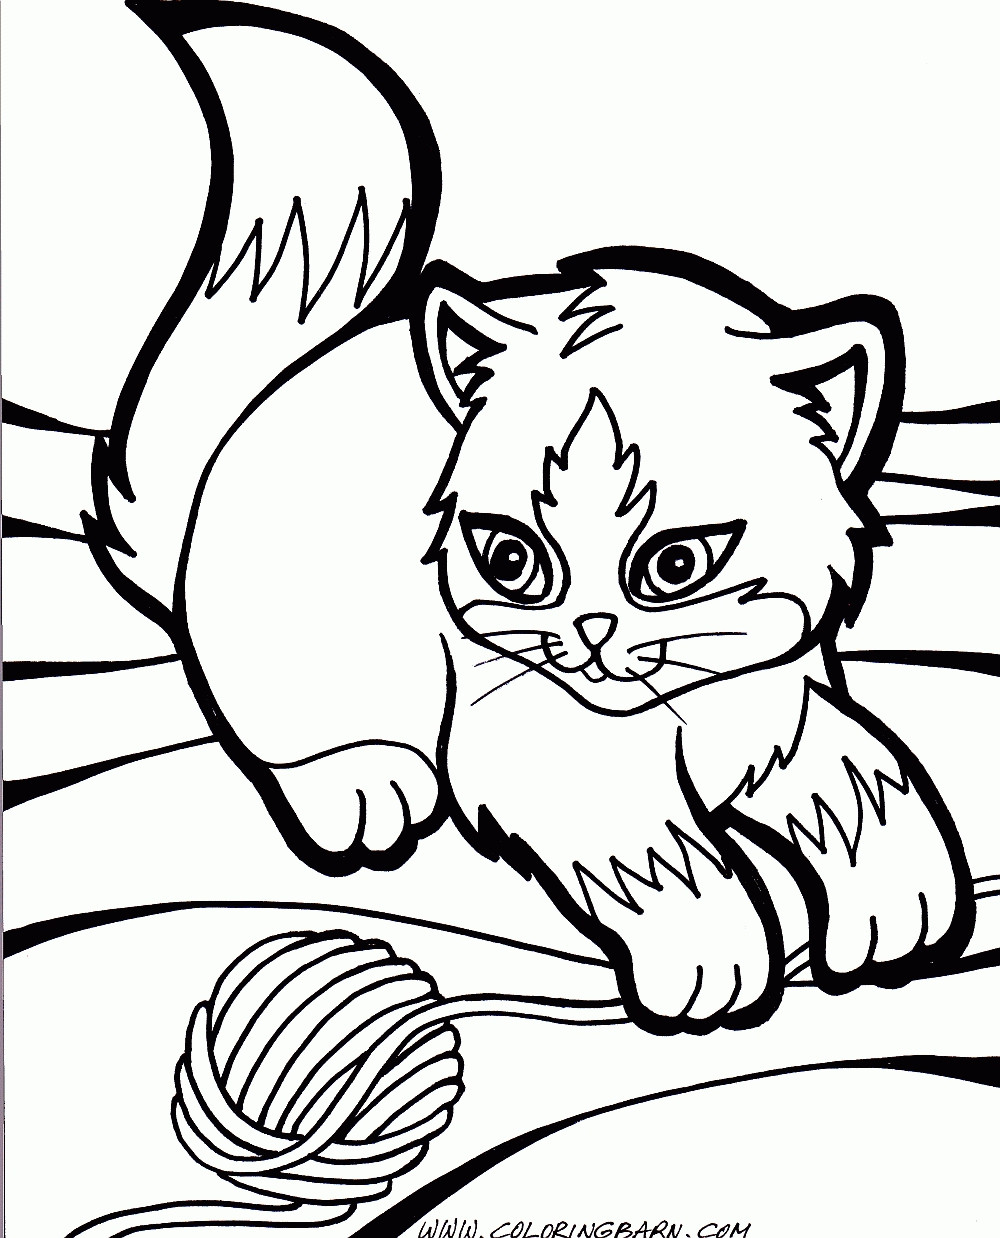 Free Coloring Pages For Boys
 32 Awesome Free Coloring Pages for Boys Gianfreda